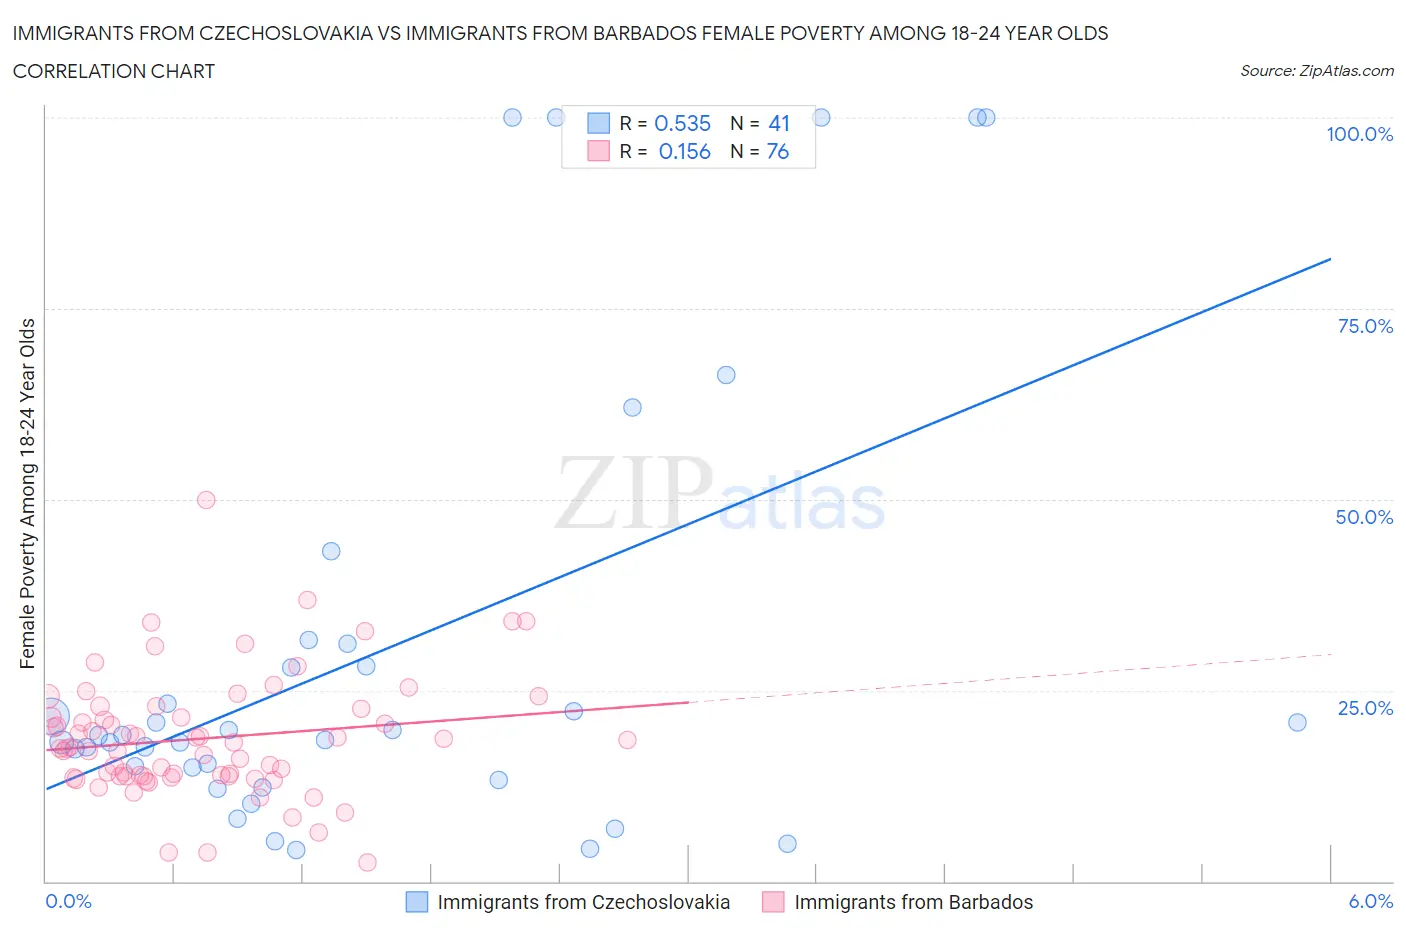 Immigrants from Czechoslovakia vs Immigrants from Barbados Female Poverty Among 18-24 Year Olds